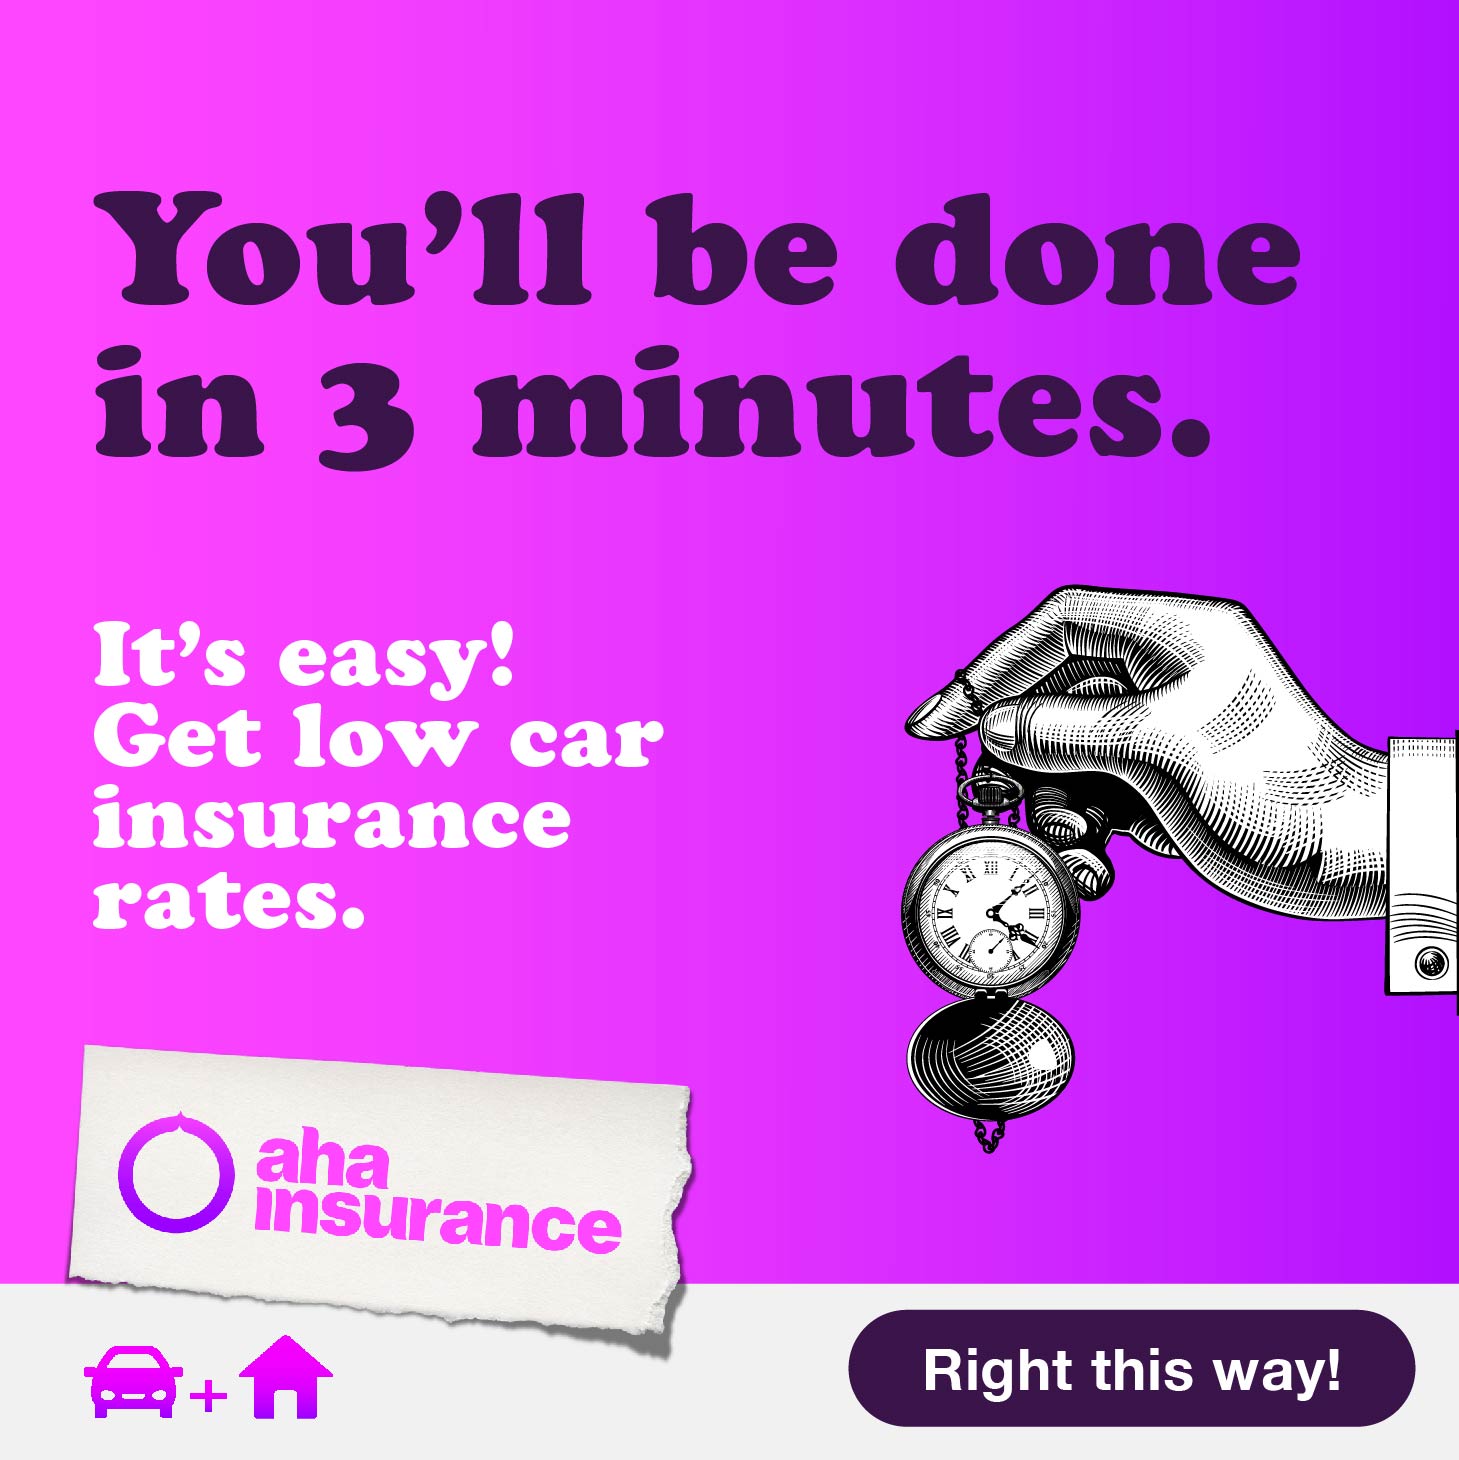 "You'll be done in 3 minutes. It's easy! Get low car insurance rates" beside a hand holding a pocket watch, above the aha insurance logo with icons for car and home insurance.